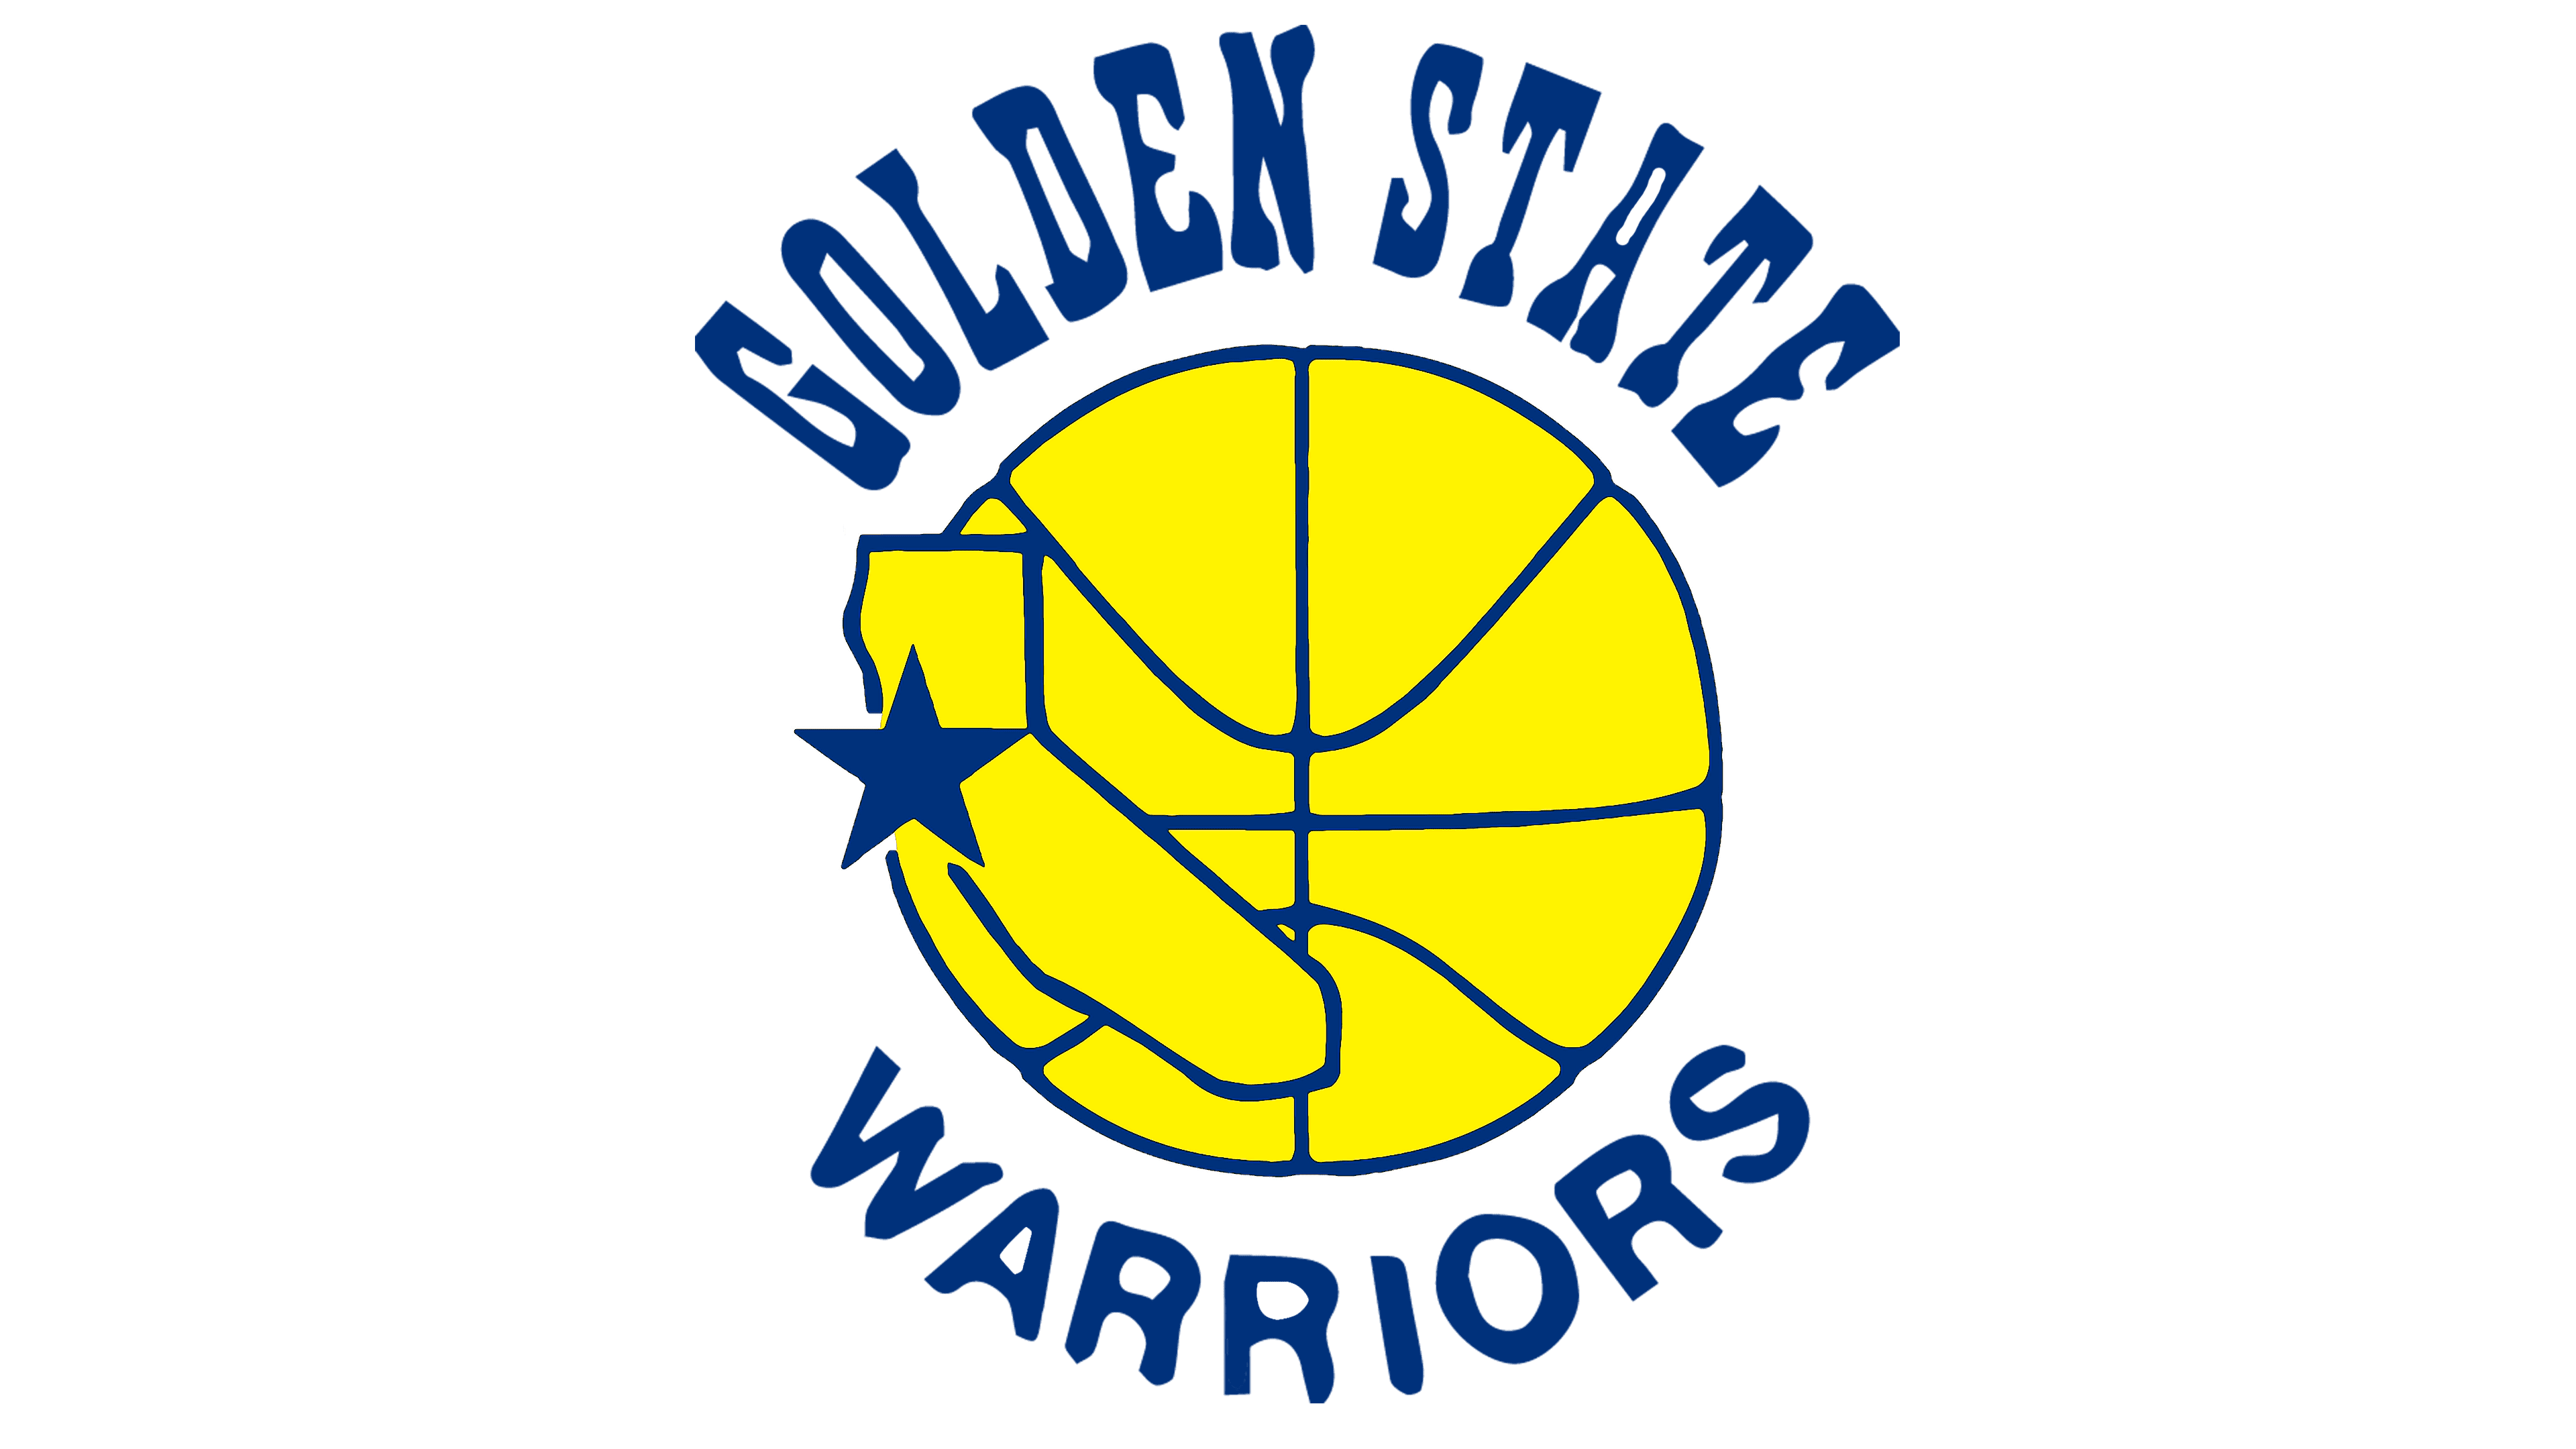 Golden State Warriors Logo and symbol, meaning, history, sign.